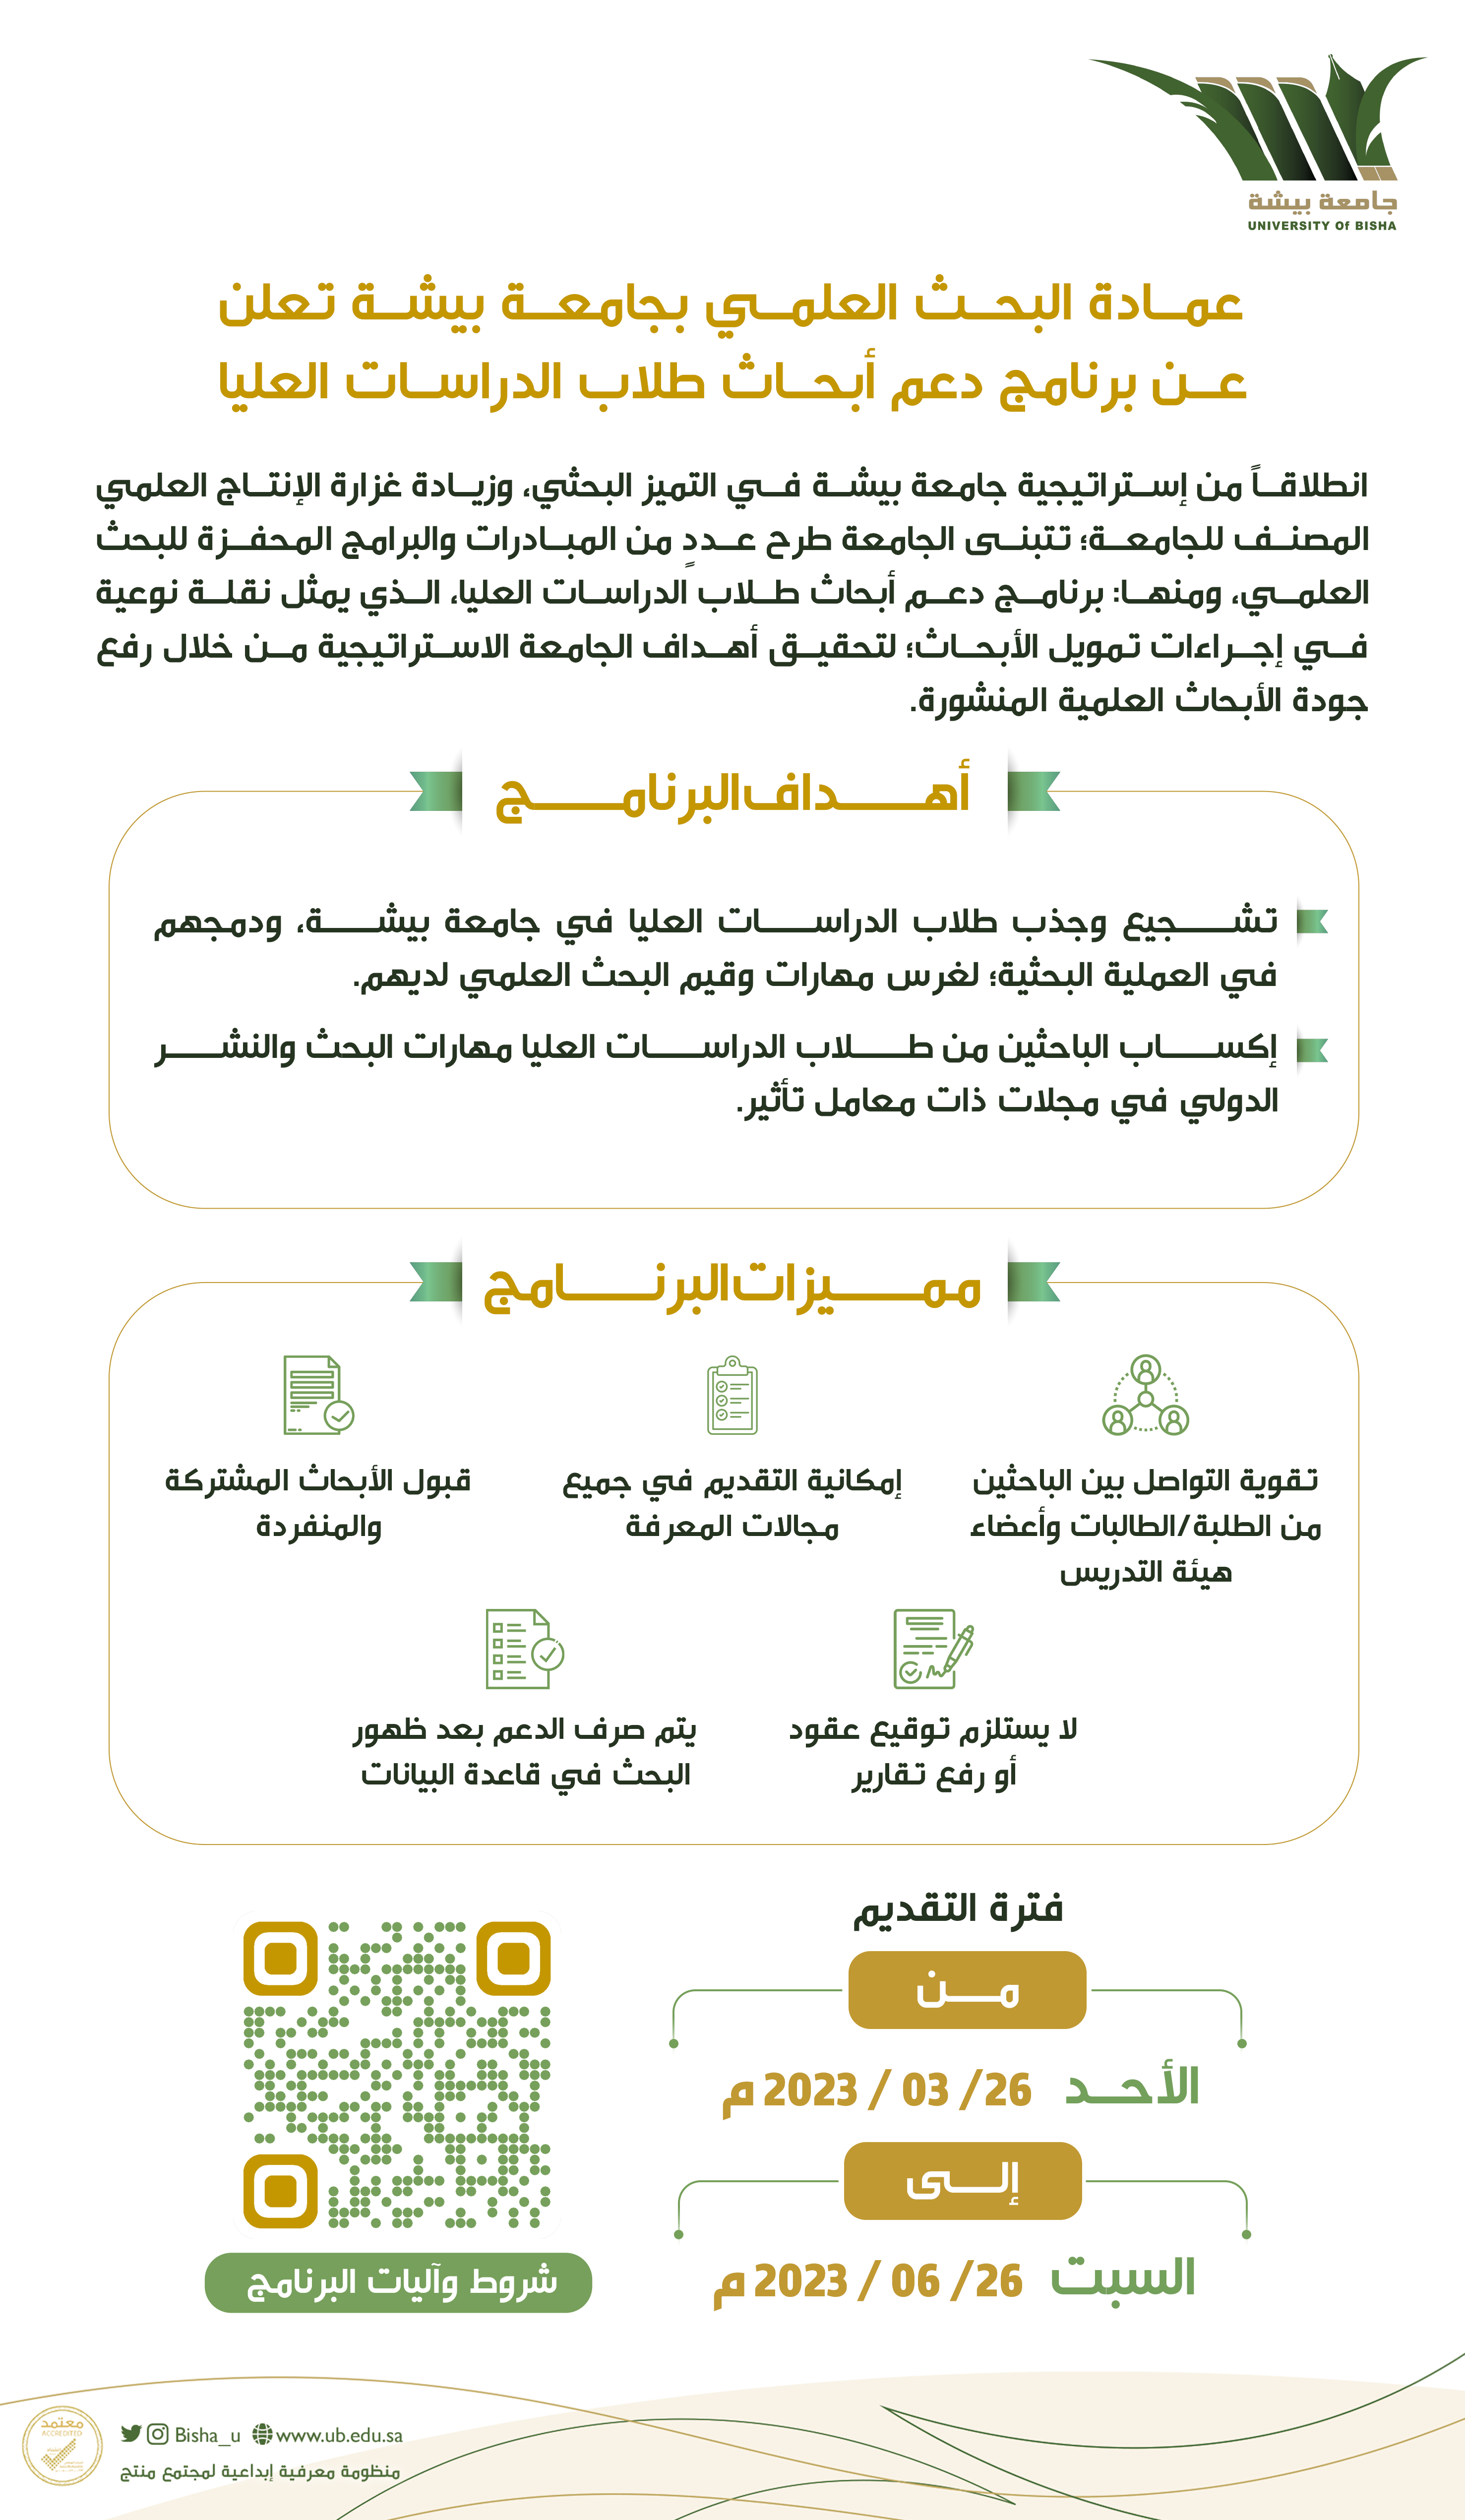 The Deanship of Scientific Research at the University of Bisha announces the postgraduate research support program